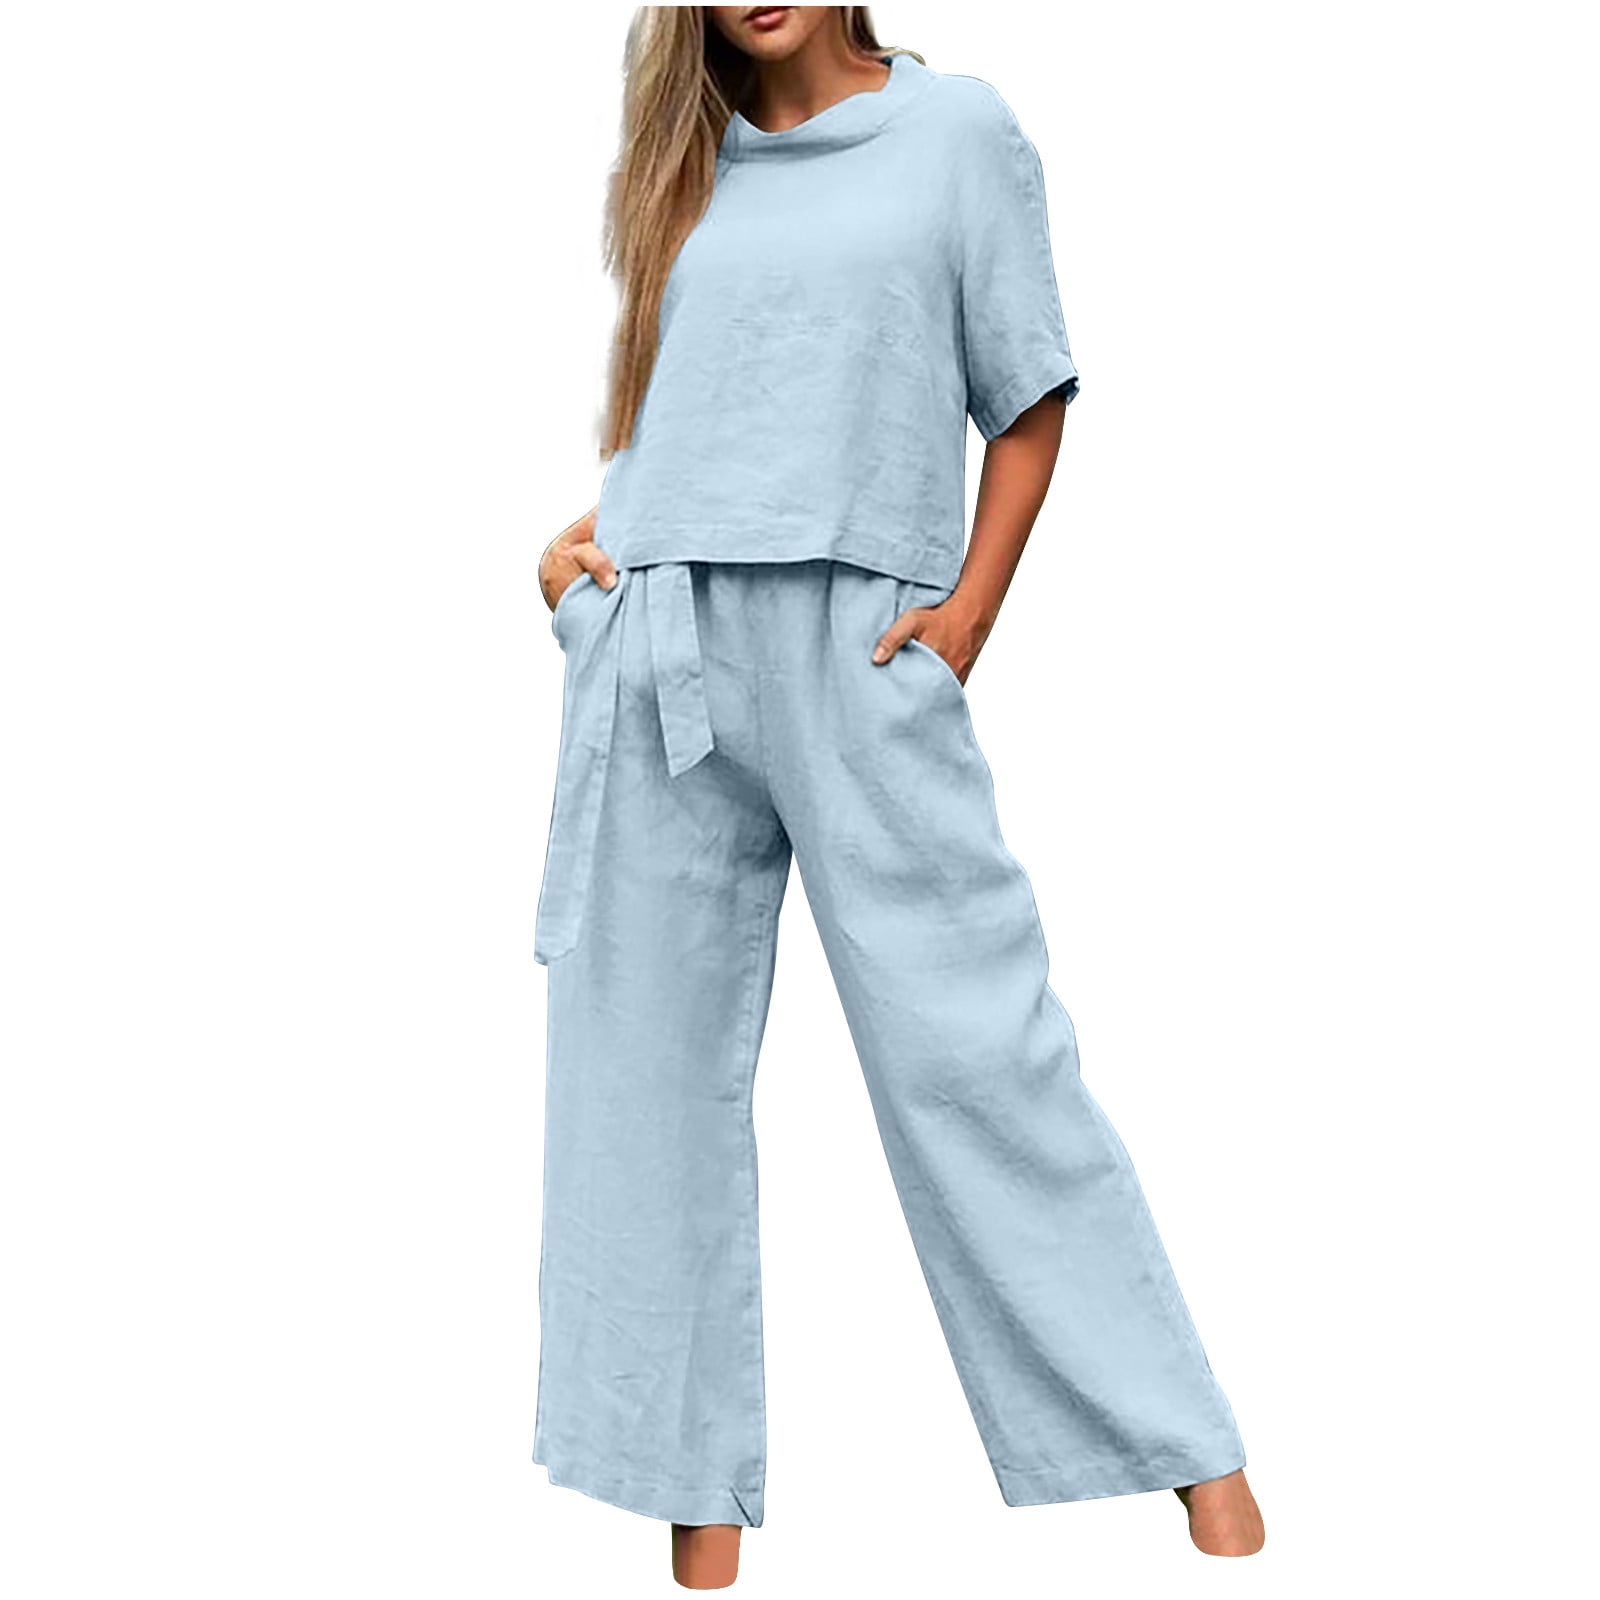 Womens Casual Two Piece Wide Leg Pants Outfit Set With Short Sleeves,  Pocket, Turn Down Collar Top, And Lace Up Wide Leg Pants Outfit For Spring  And Summer Outings From Luohanguo, $25.83